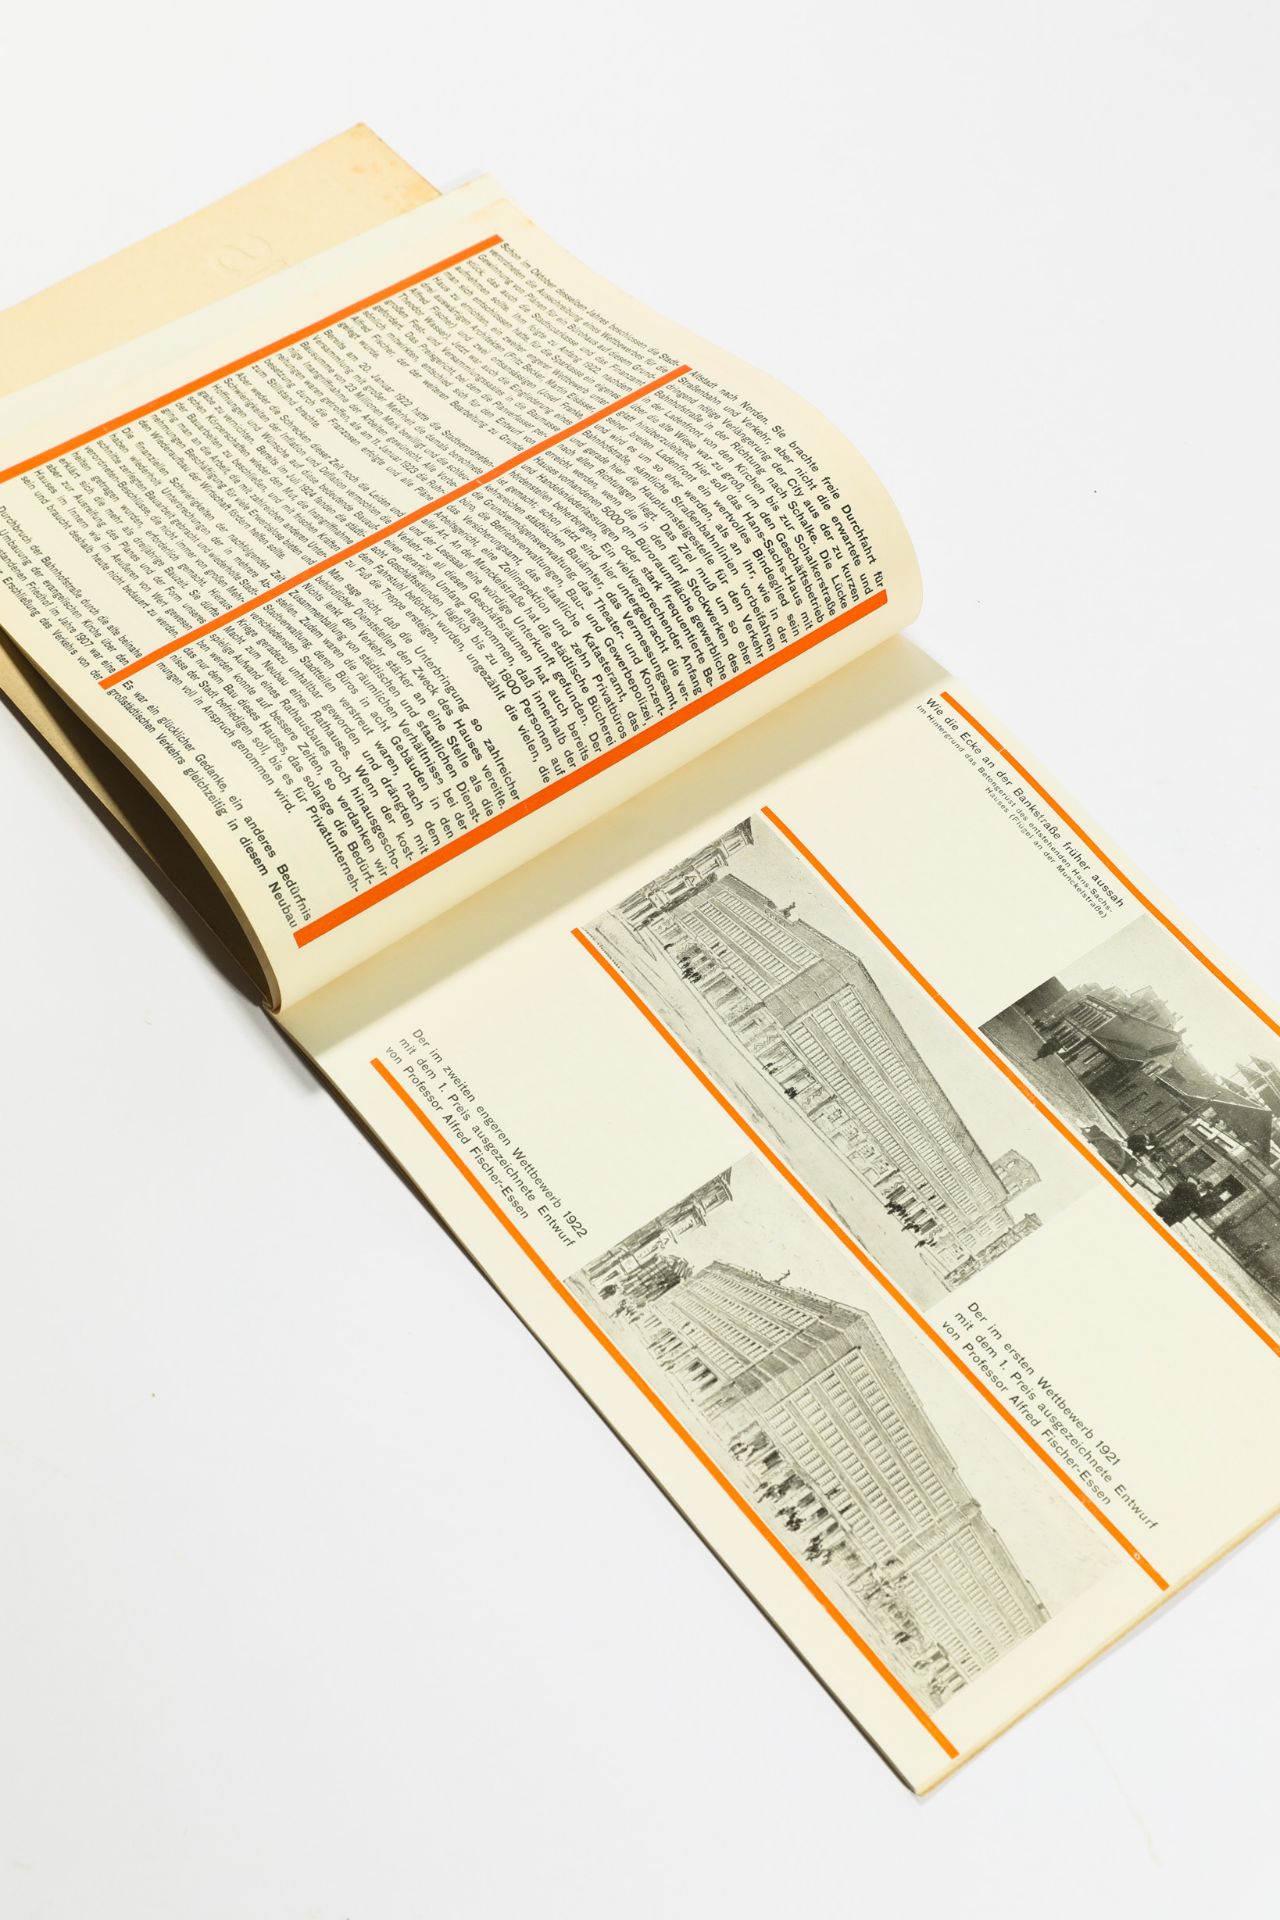 Max Burchartz, 6 Books/ Typographies after his designs - Image 11 of 21